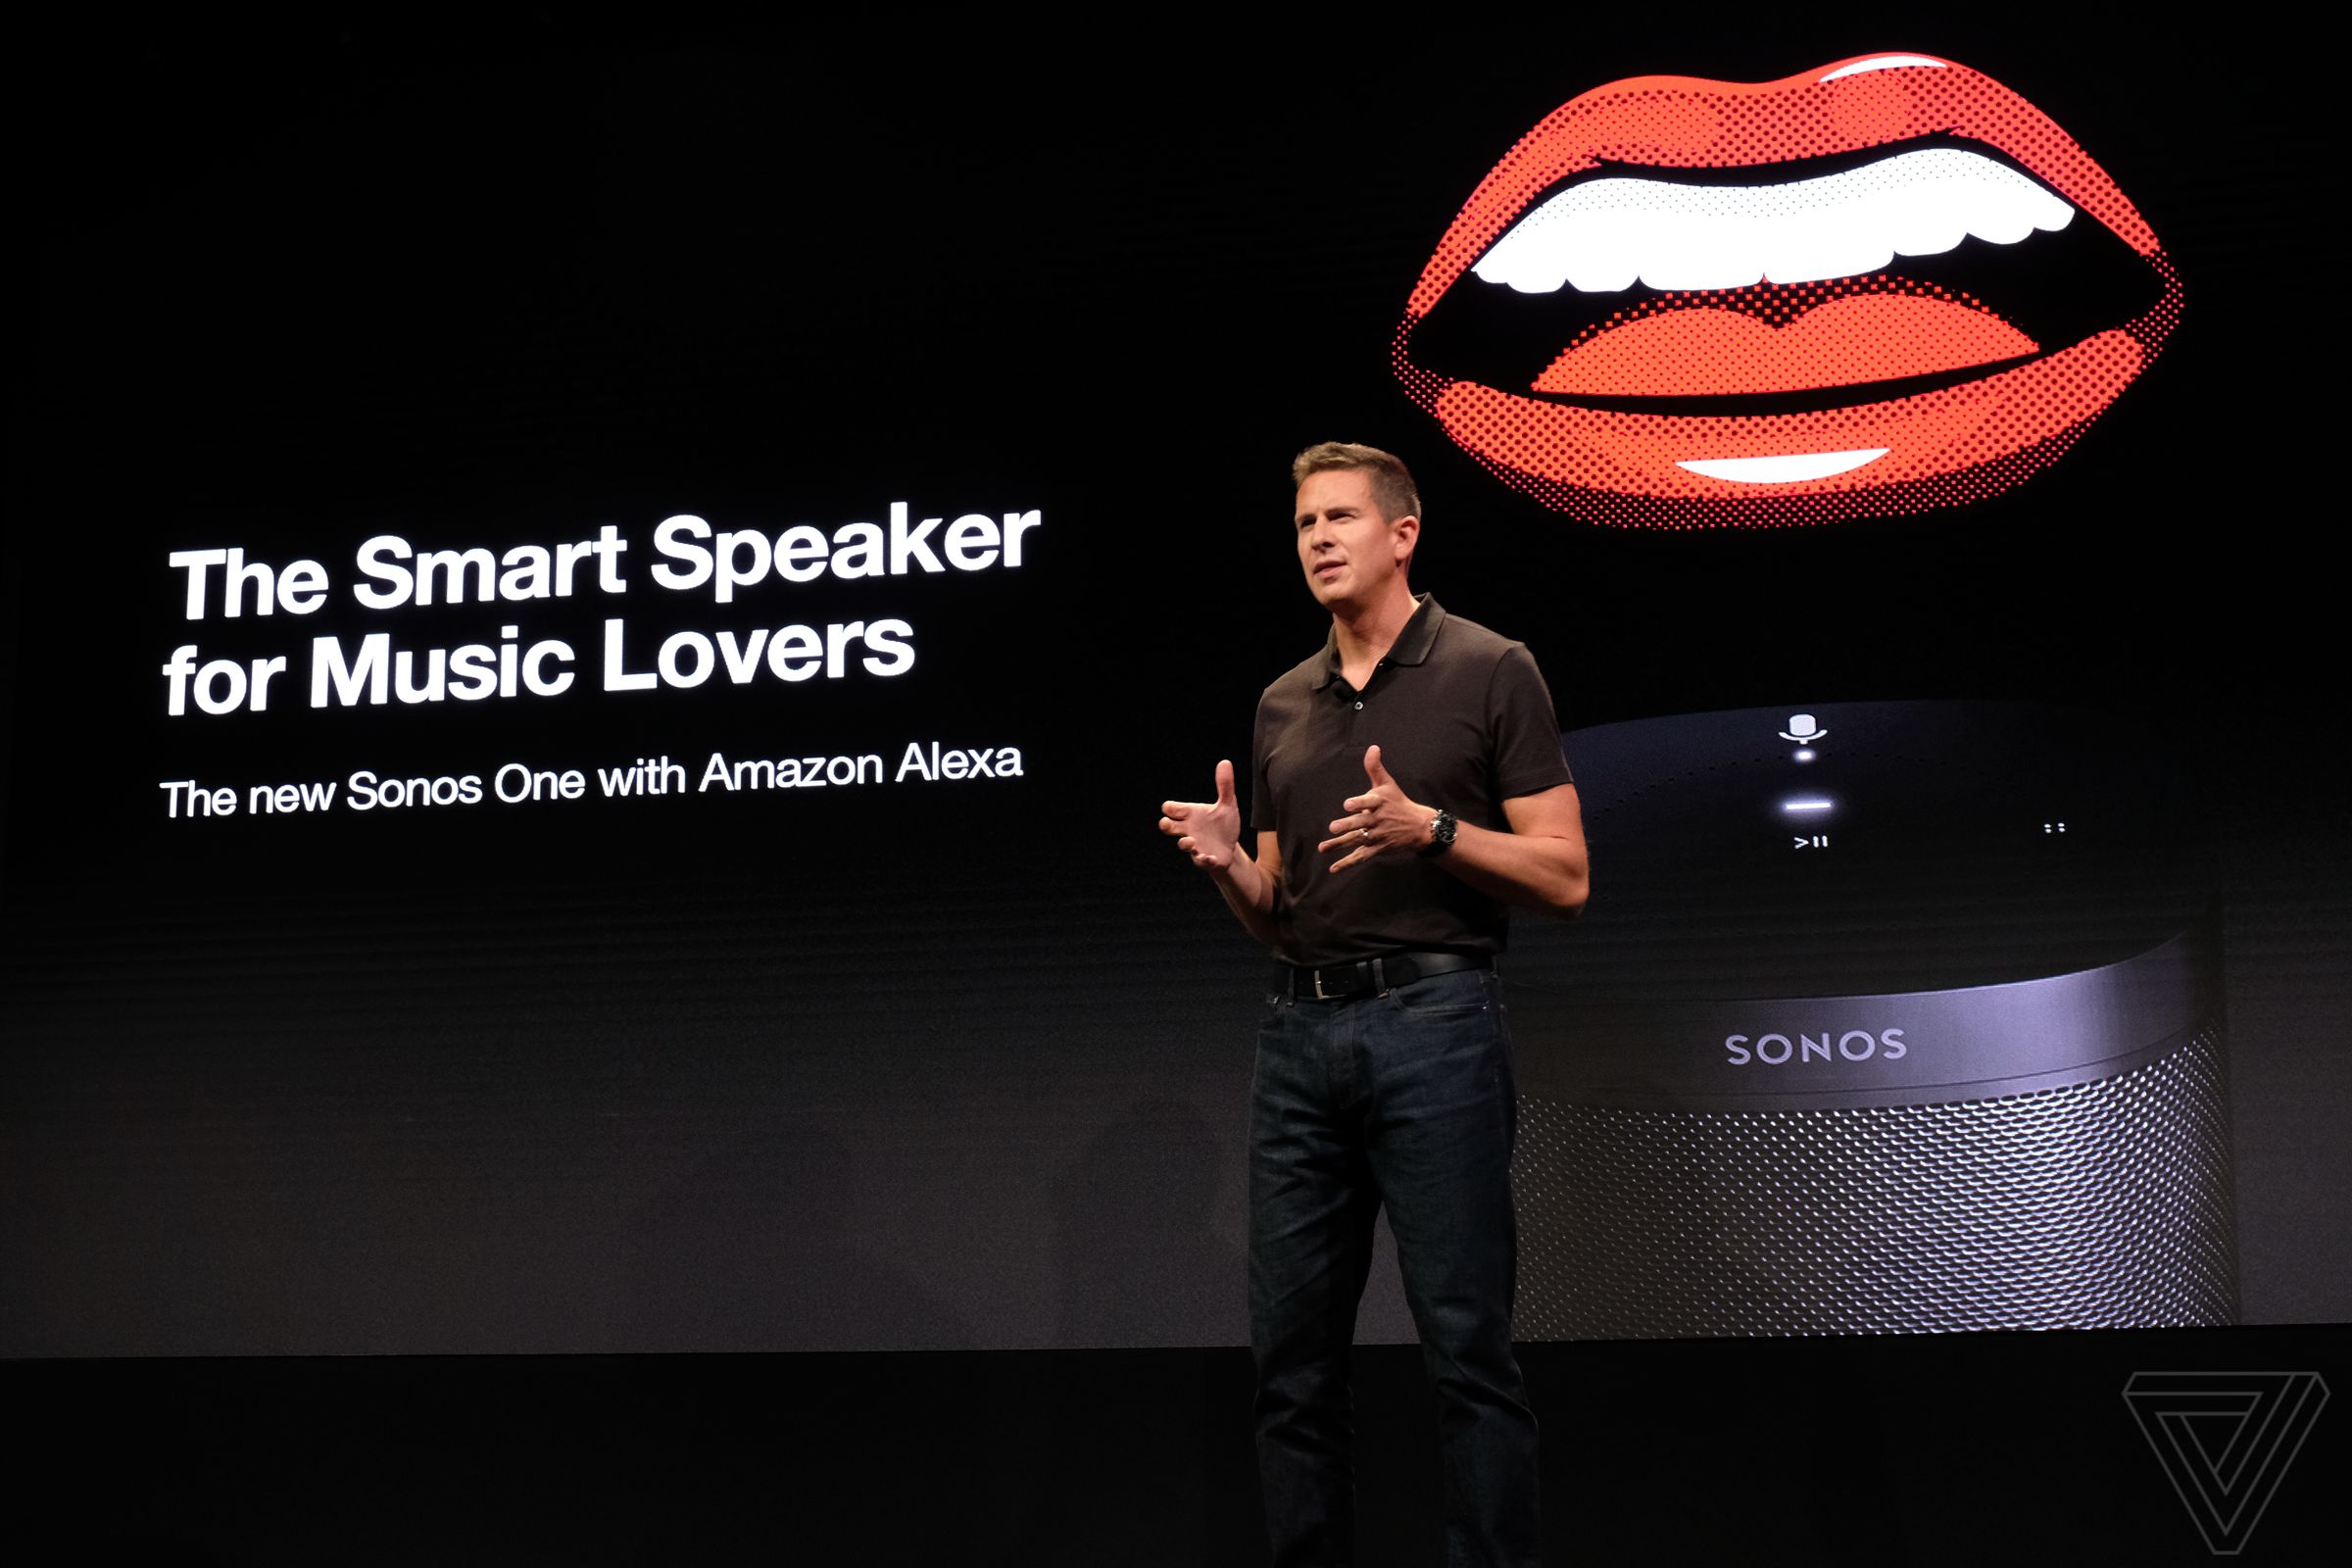 Sonos CEO Patrick Spence and the new Sonos One.